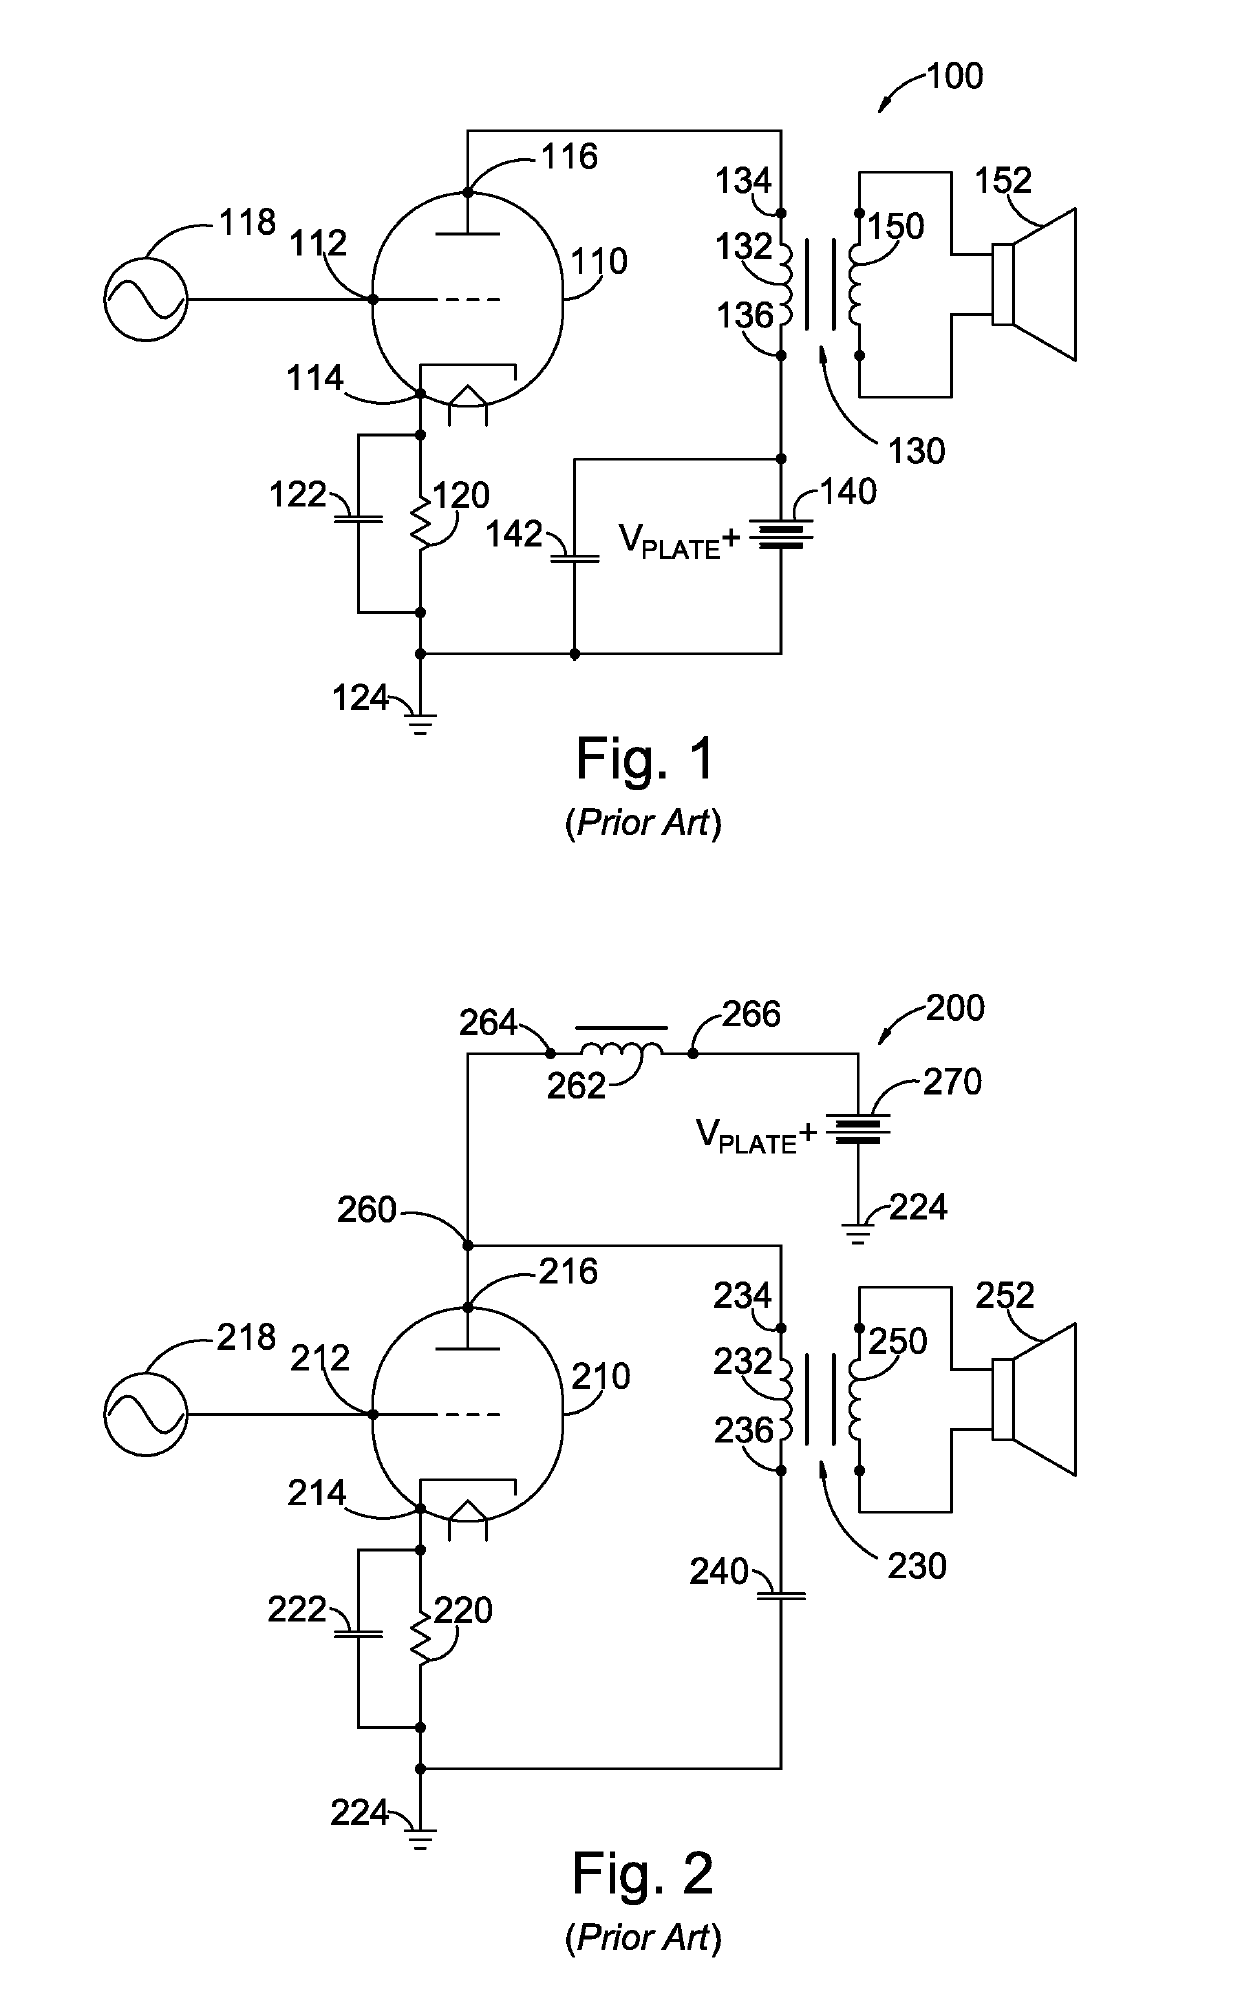 Steered current source for single-ended class-A amplifier